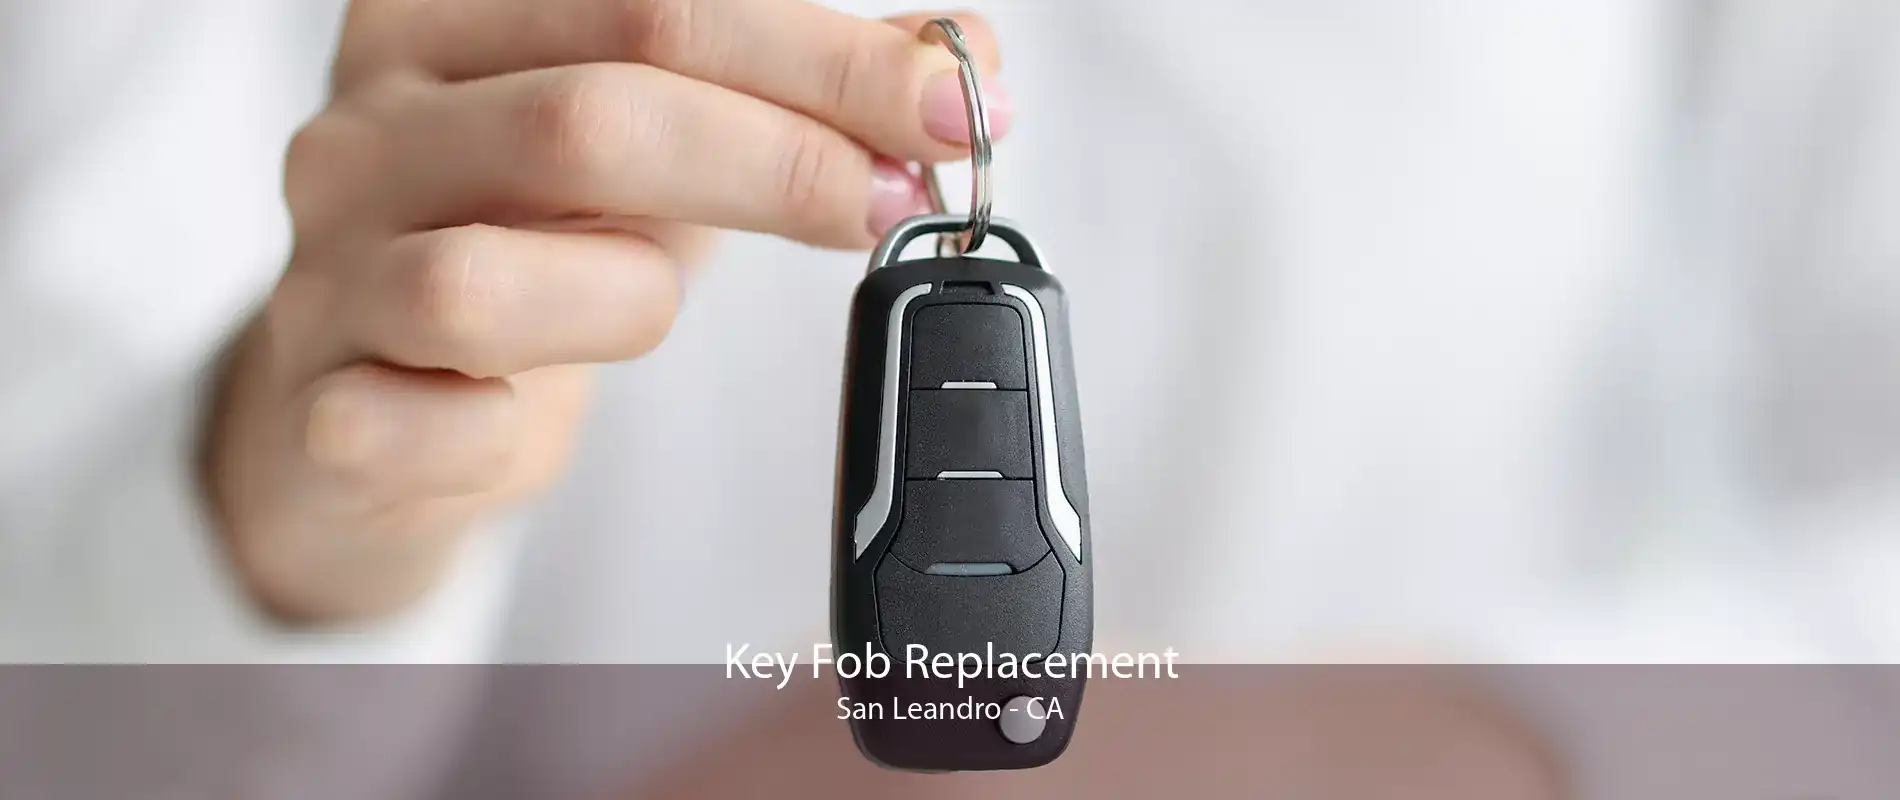 Key Fob Replacement San Leandro - CA